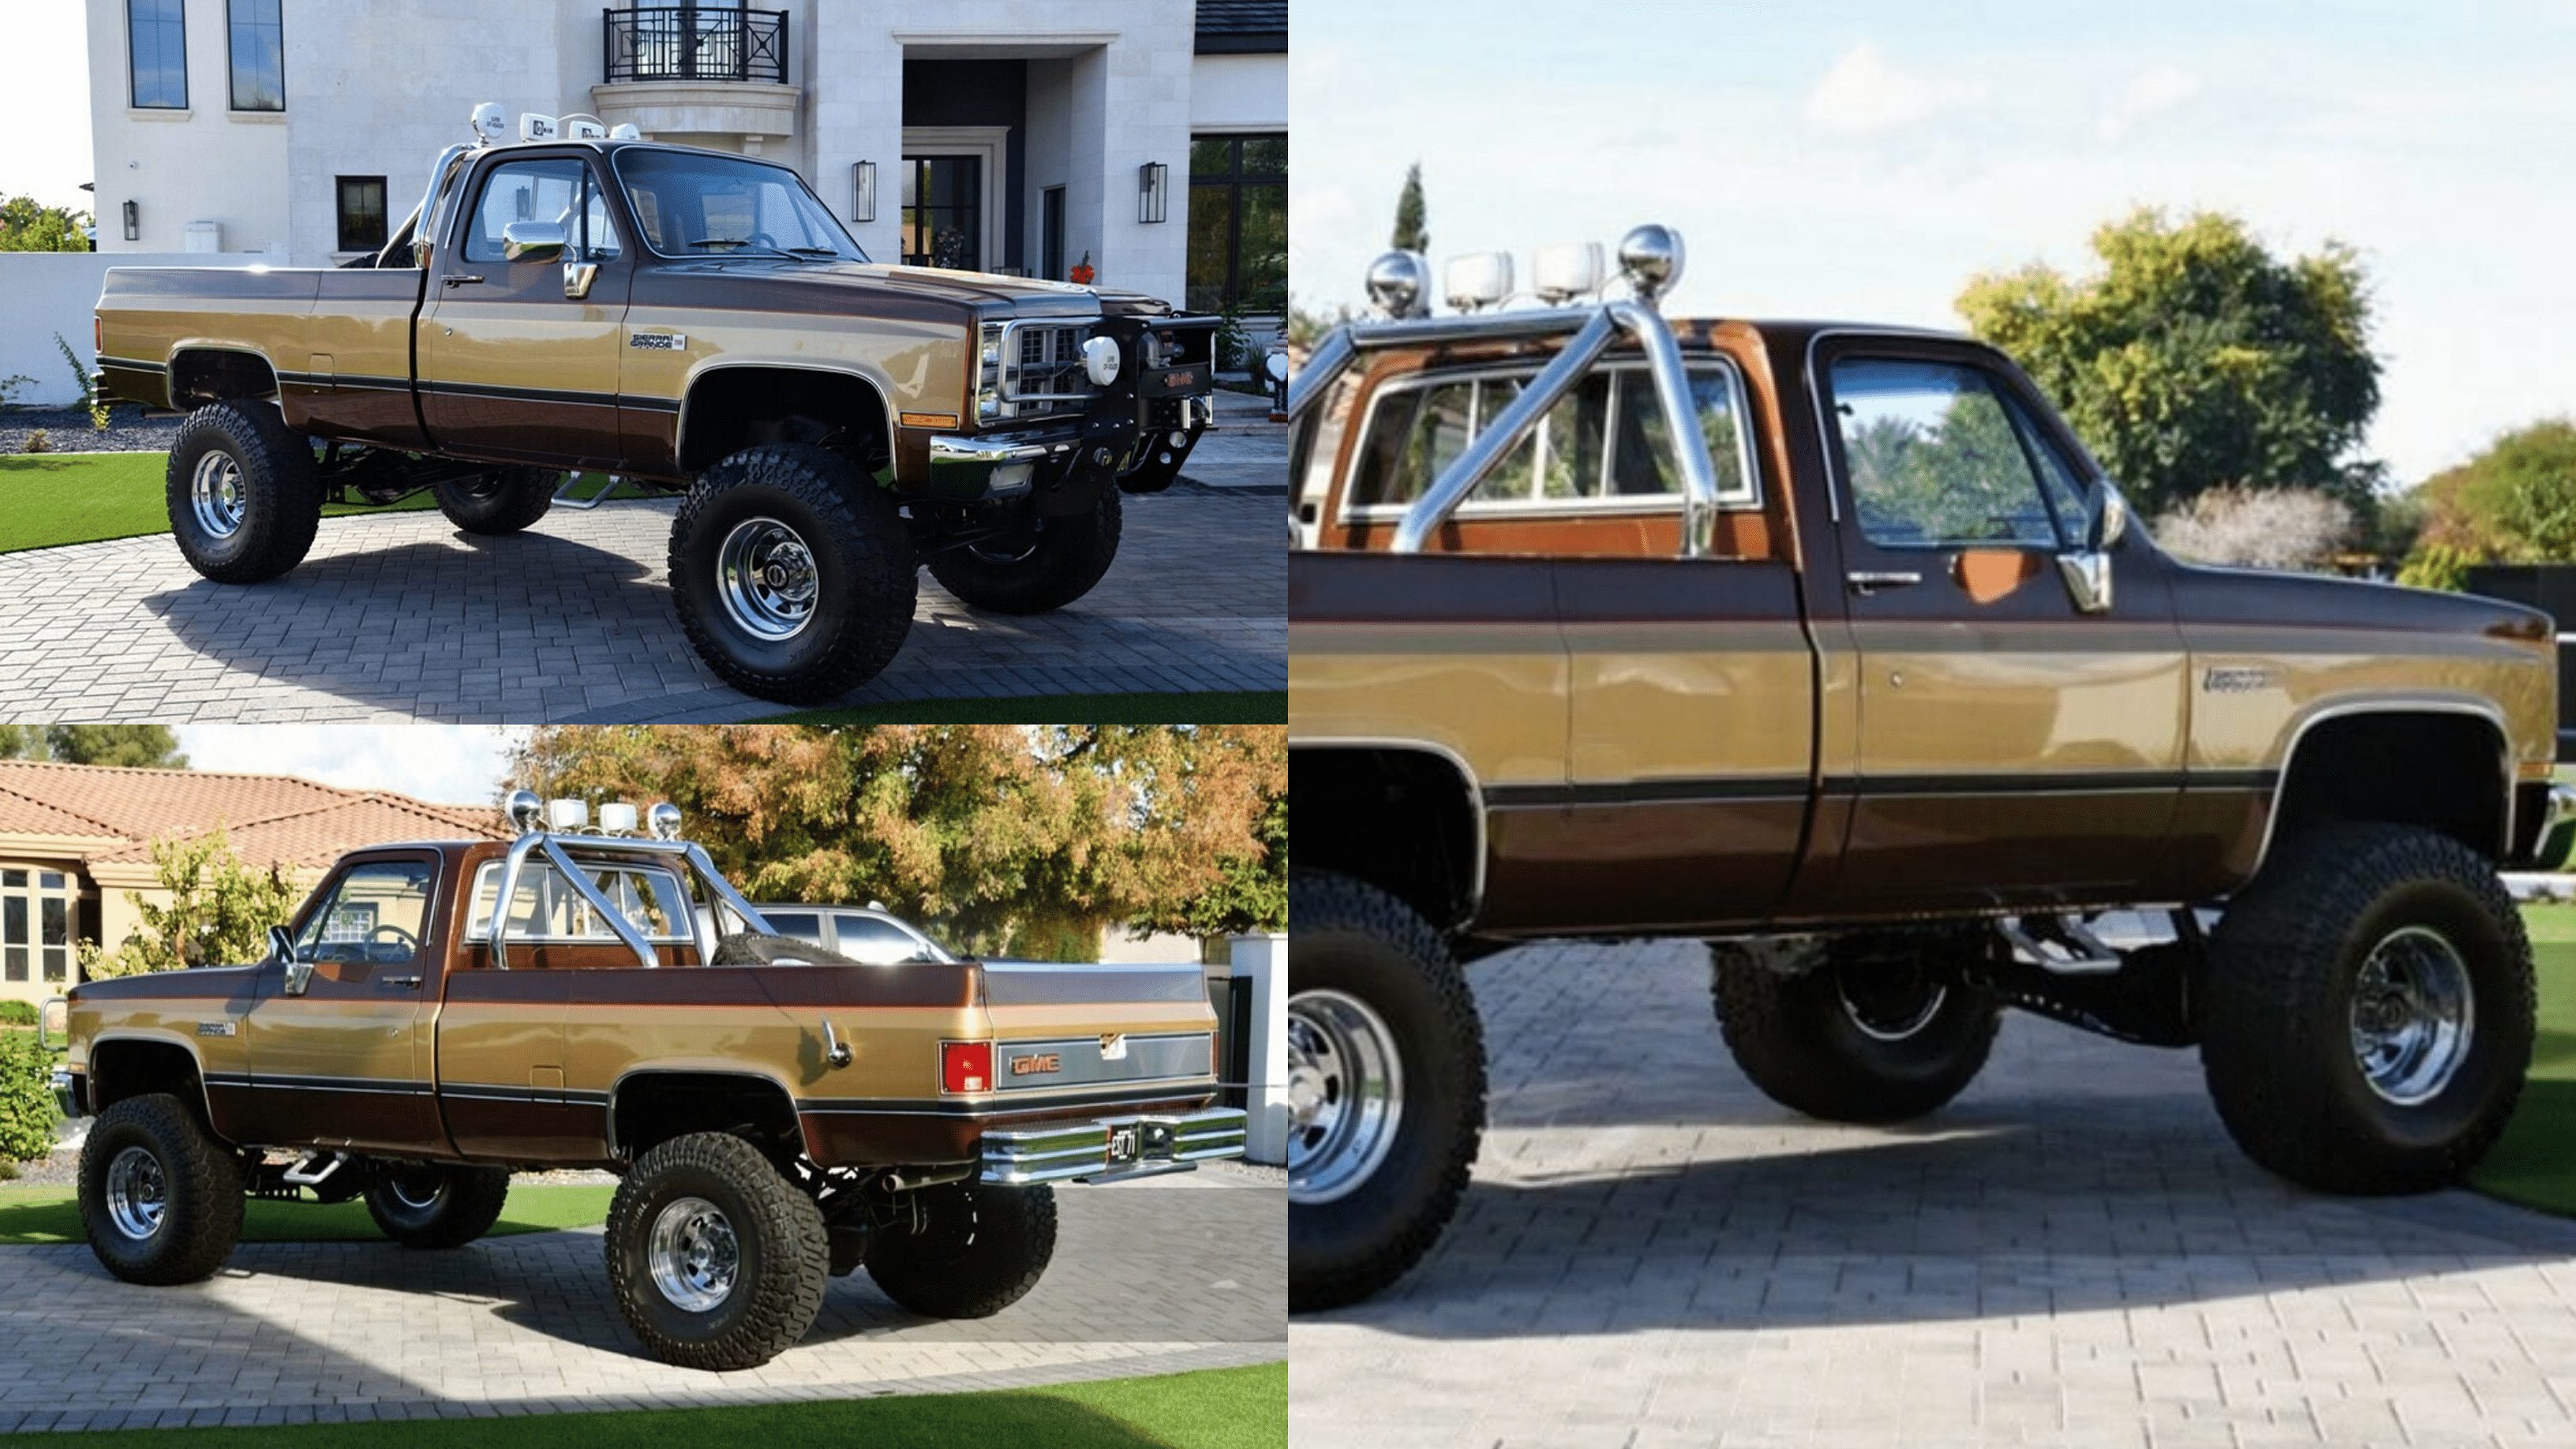 1989 GMC Sierra 3500 from the Fall Guy's Series